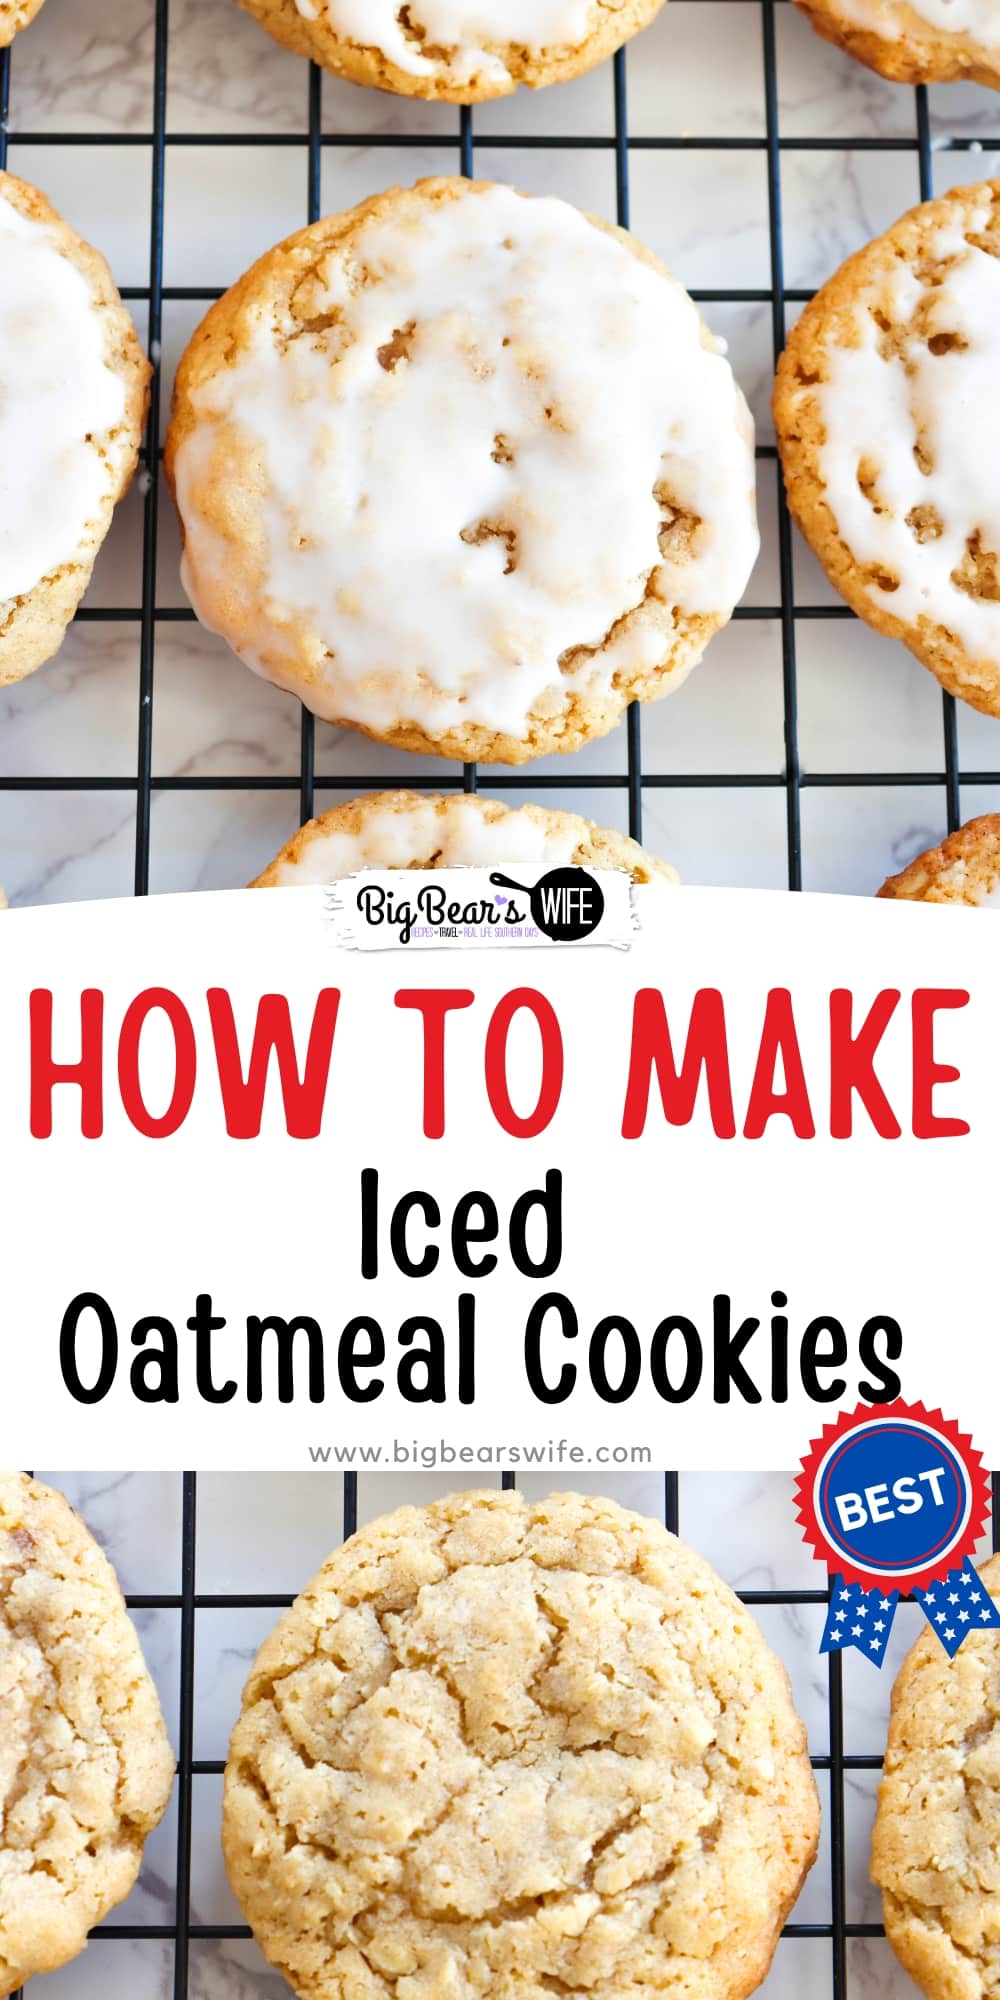 Indulge in the sweet nostalgia of Grandma's kitchen by recreating these delectable iced oatmeal cookies. Whether it's for a special occasion or simply to satisfy your cravings, with this recipe, you can enjoy a taste of the past. So put on your apron, gather your ingredients, and let your kitchen fill with the comforting aroma of these classic cookies! via @bigbearswife